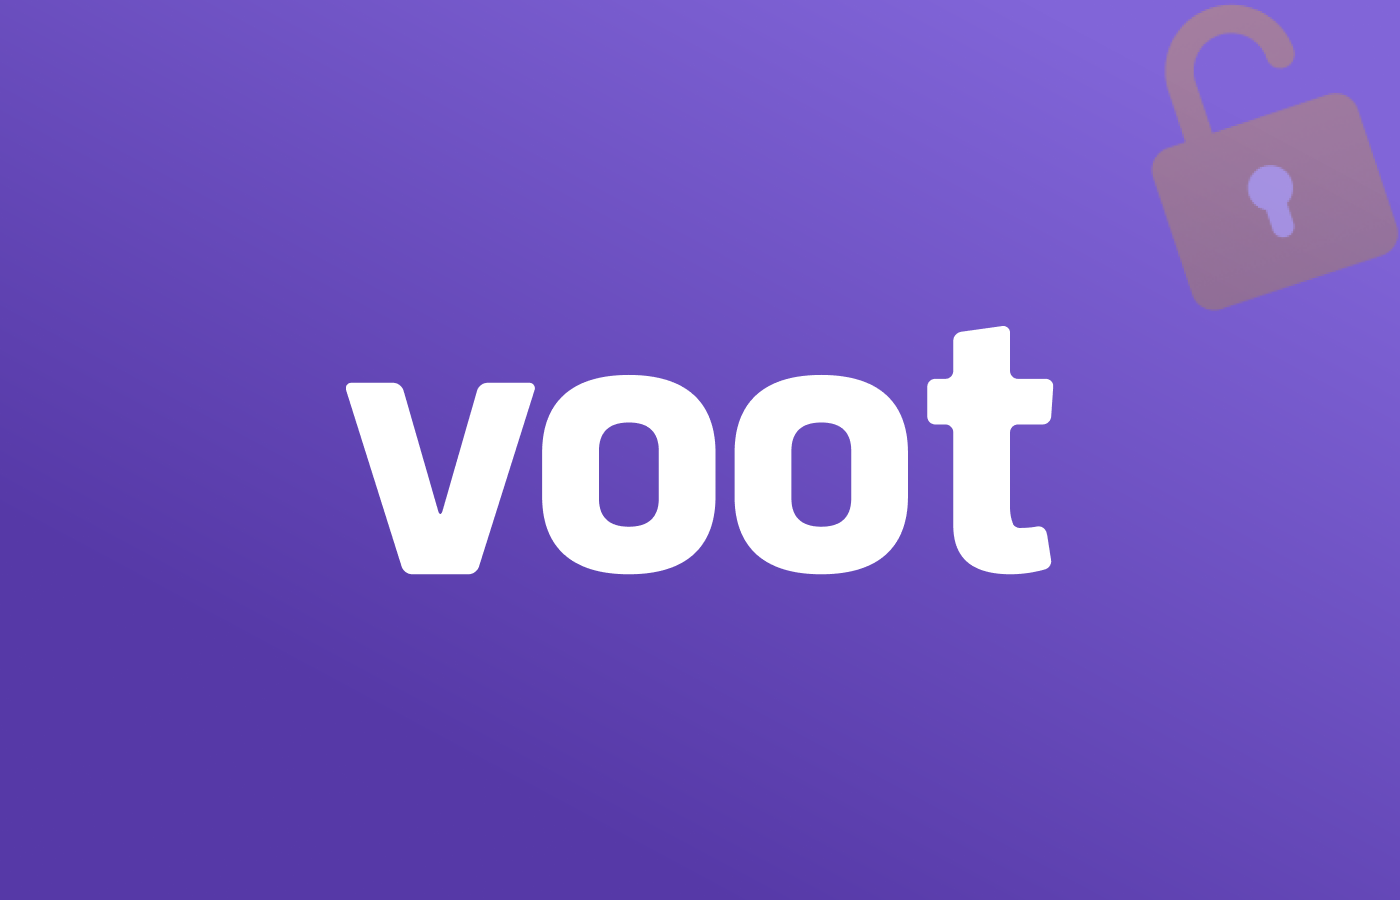 Watch Voot Outside India